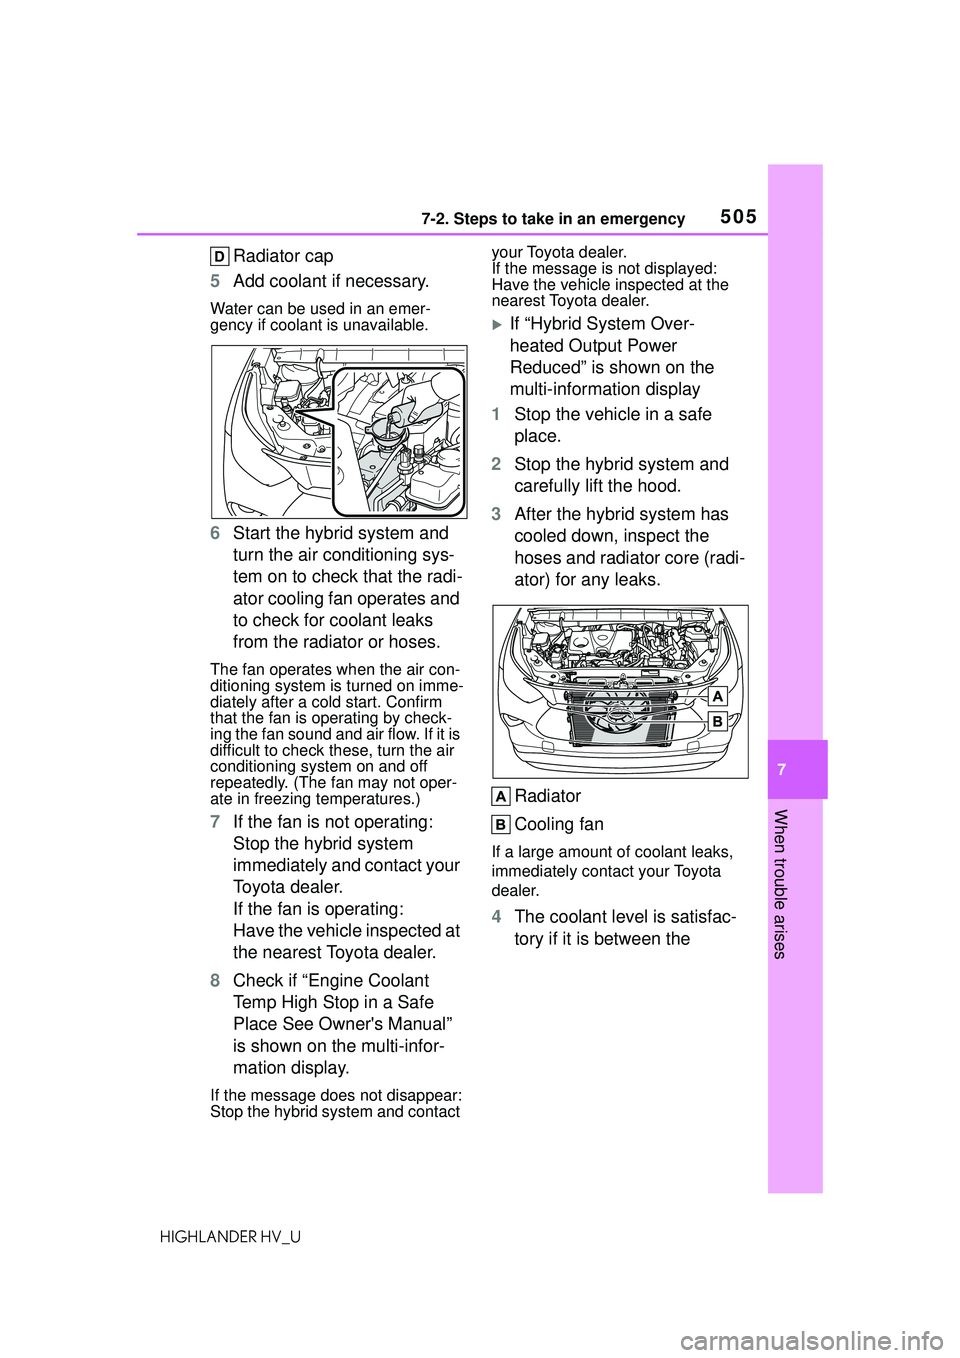 TOYOTA HIGHLANDER HYBRID 2021  Owners Manual (in English) 5057-2. Steps to take in an emergency
7
When trouble arises
HIGHLANDER HV_U
Radiator cap
5 Add coolant if necessary.
Water can be used in an emer-
gency if coolant is unavailable.
6Start the hybrid sy